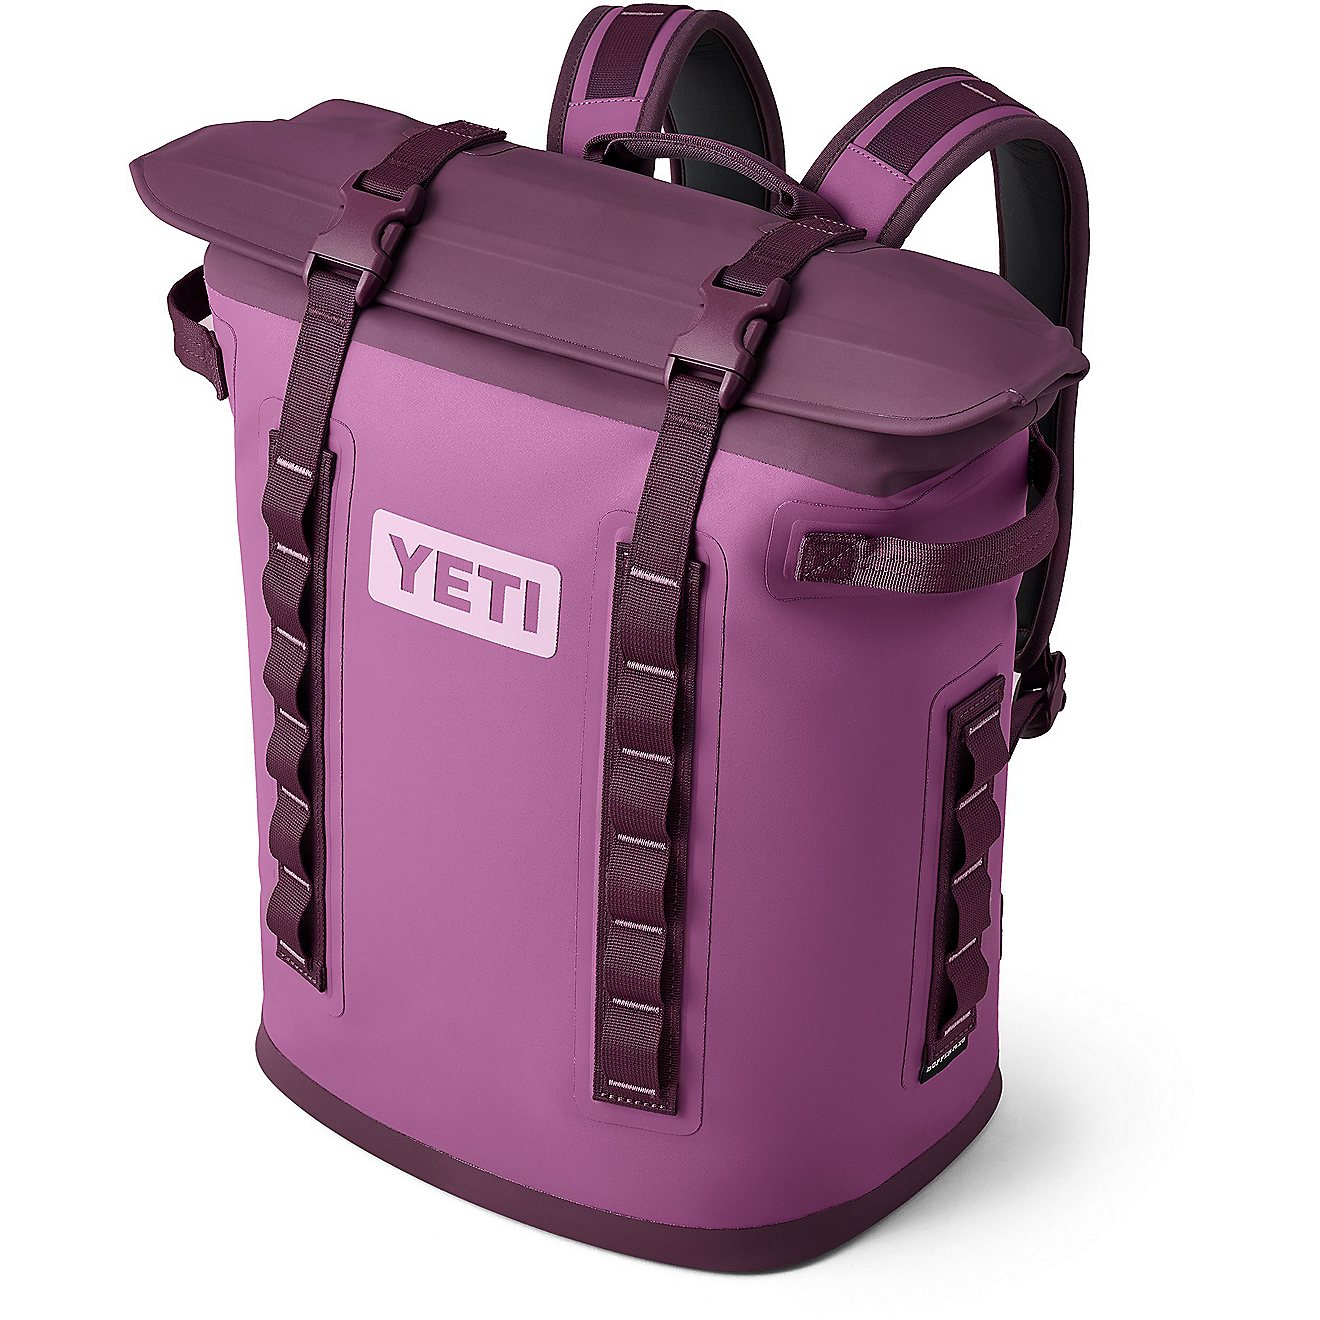 YETI Hopper M20 Backpack Cooler                                                                                                  - view number 7